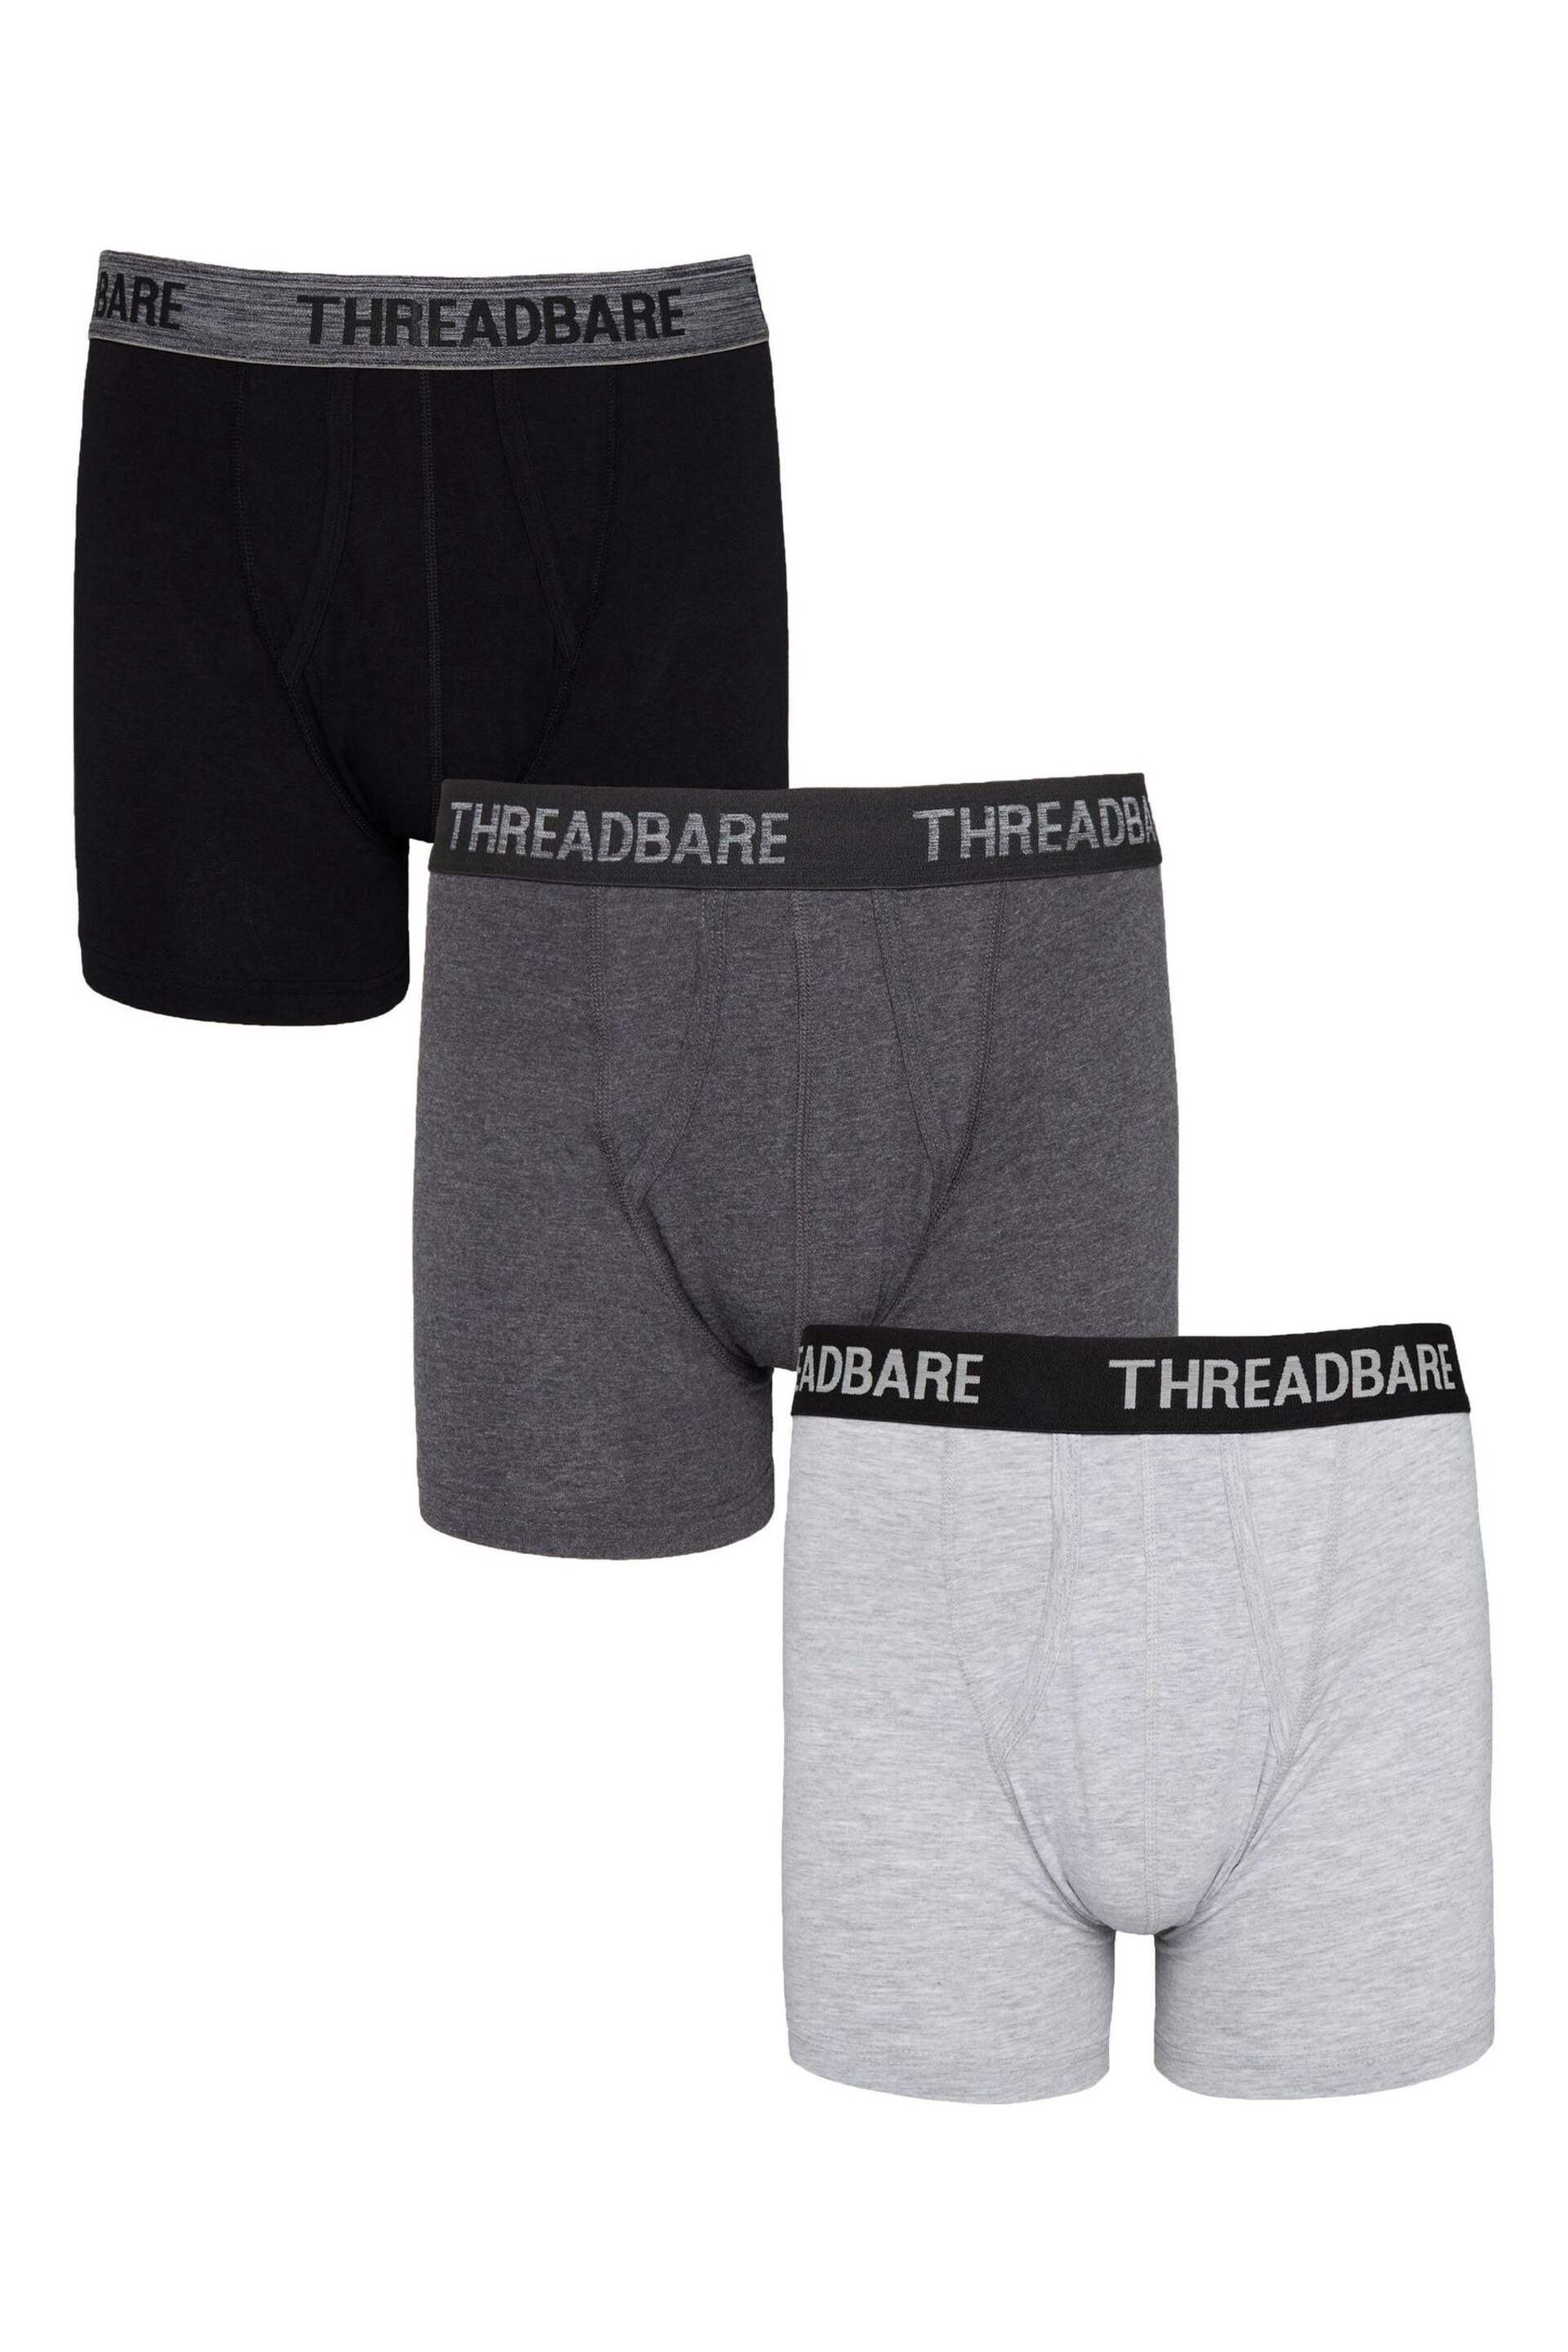 Threadbare Grey Hipster Boxers 3 Packs - Image 1 of 6